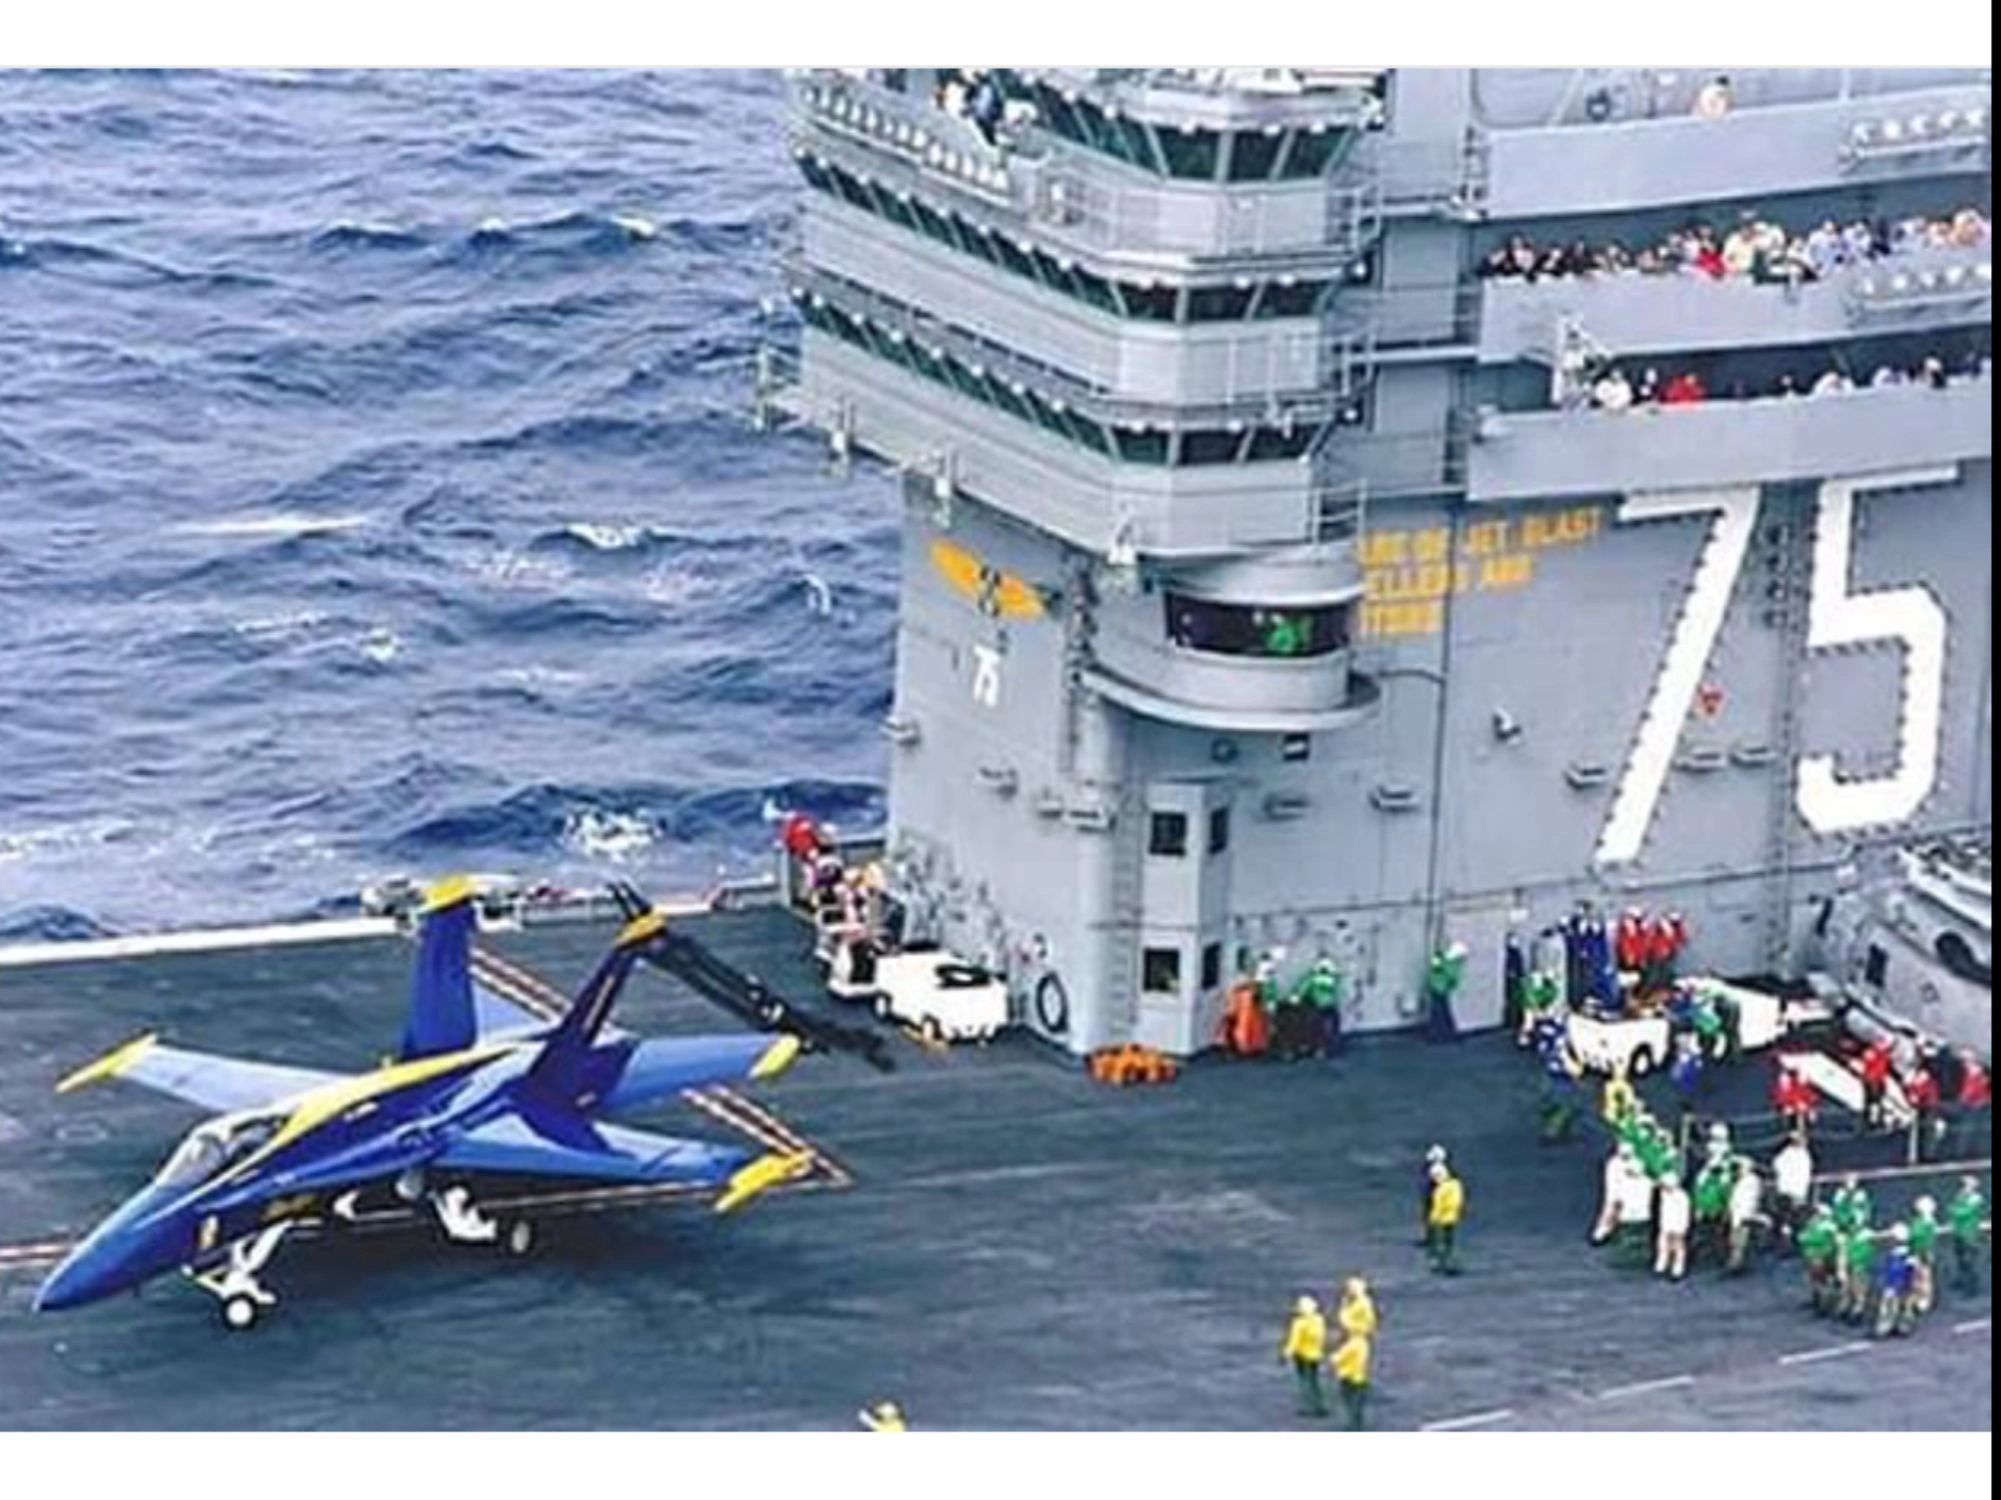 Blue Angels land on aircraft carrier (1998)